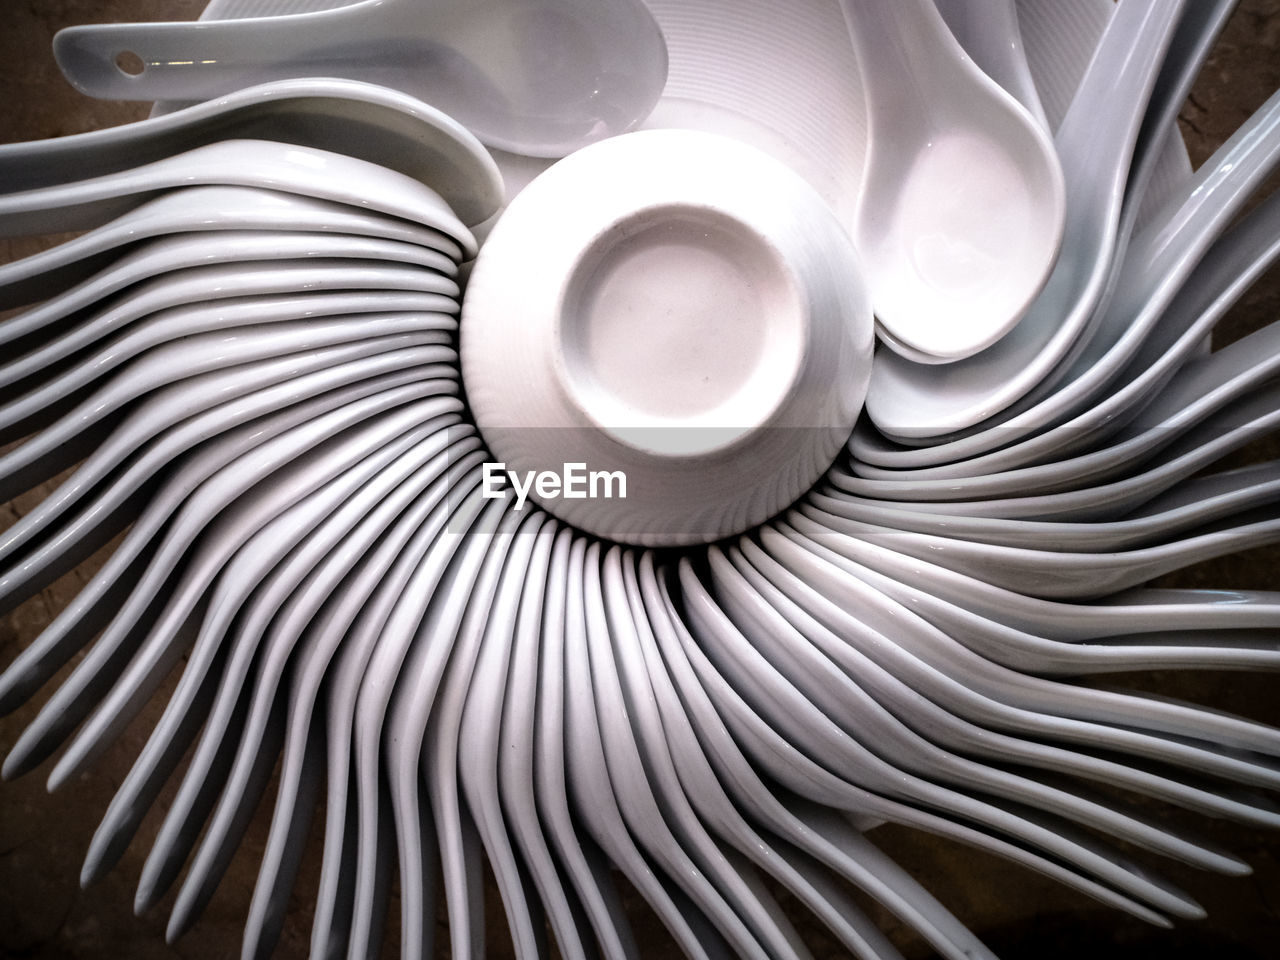 Close-up view of ceramic spoons arranged in a circle formation